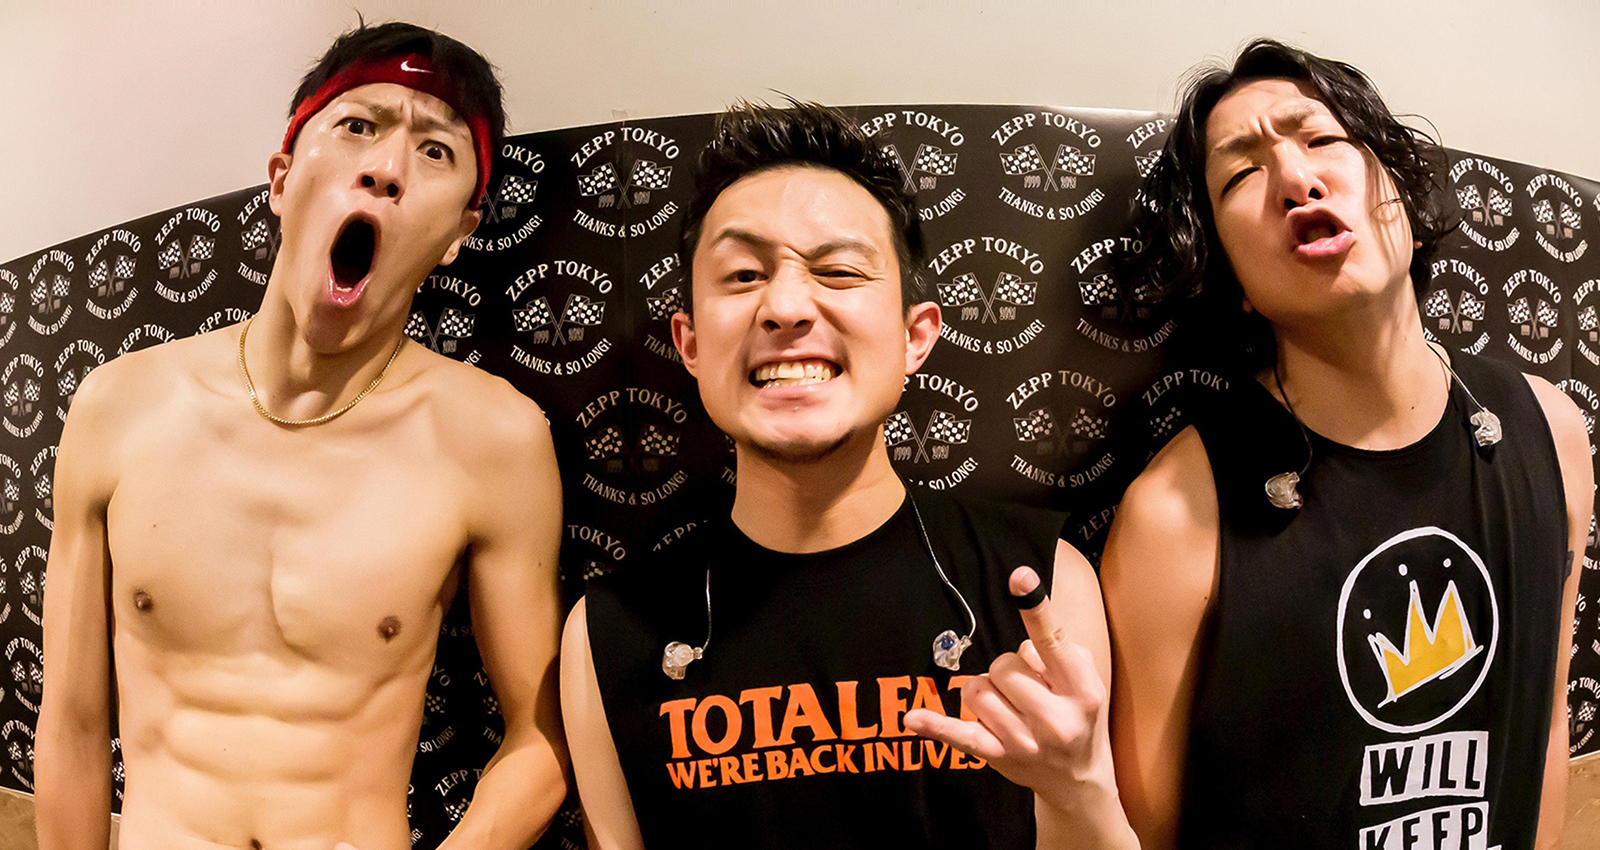 TOTALFAT BAND FOR HAPPY Tour 2022